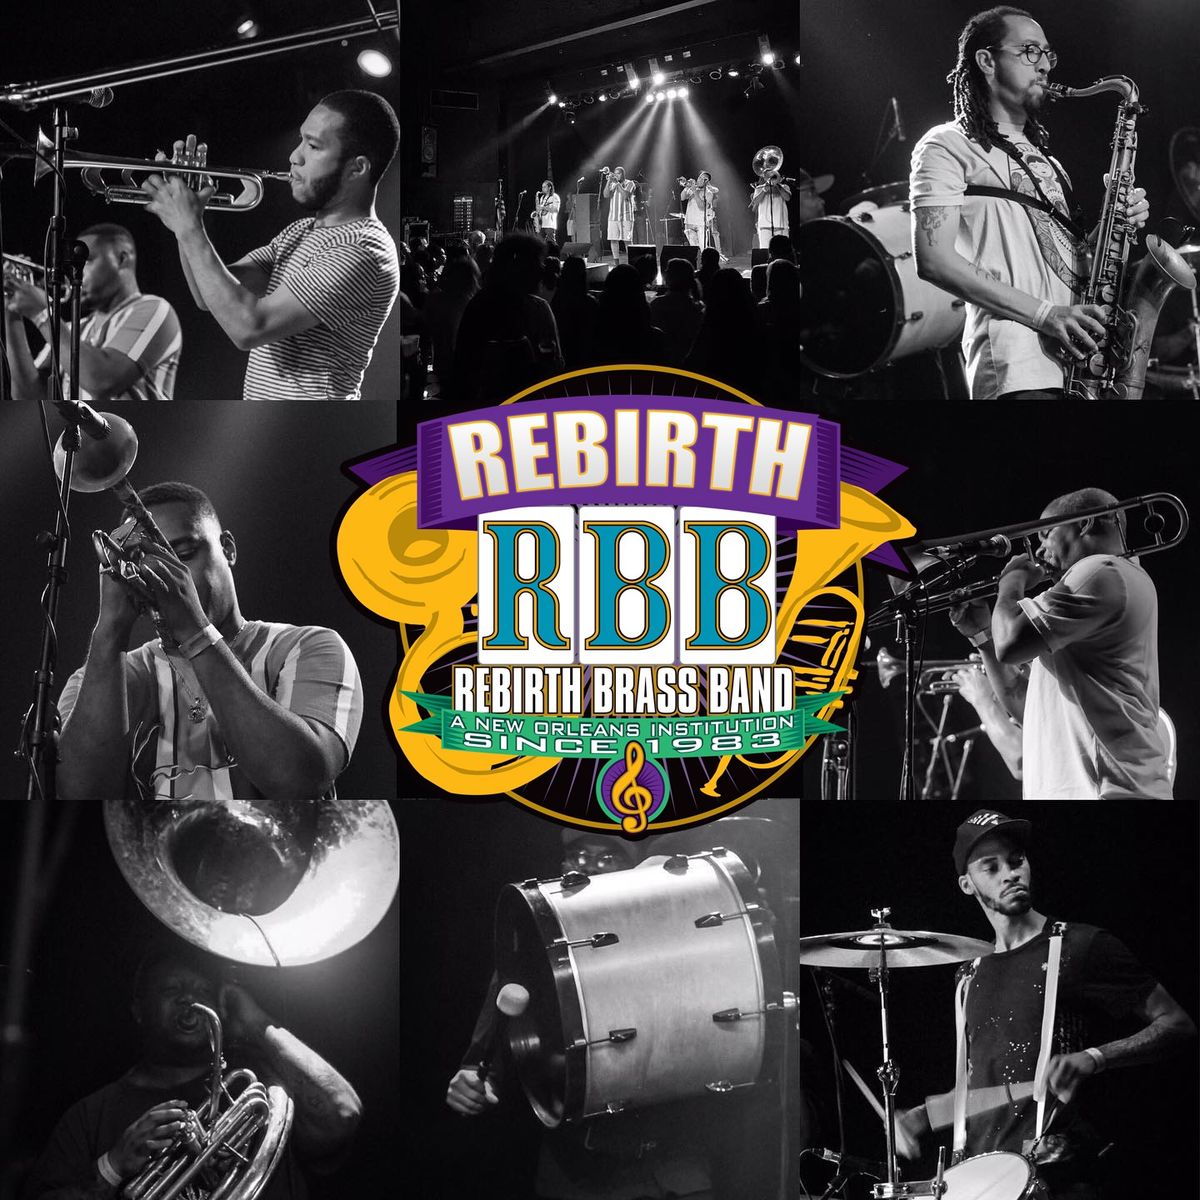 Rebirth Brass Band returns to The Miracle Inglewood!